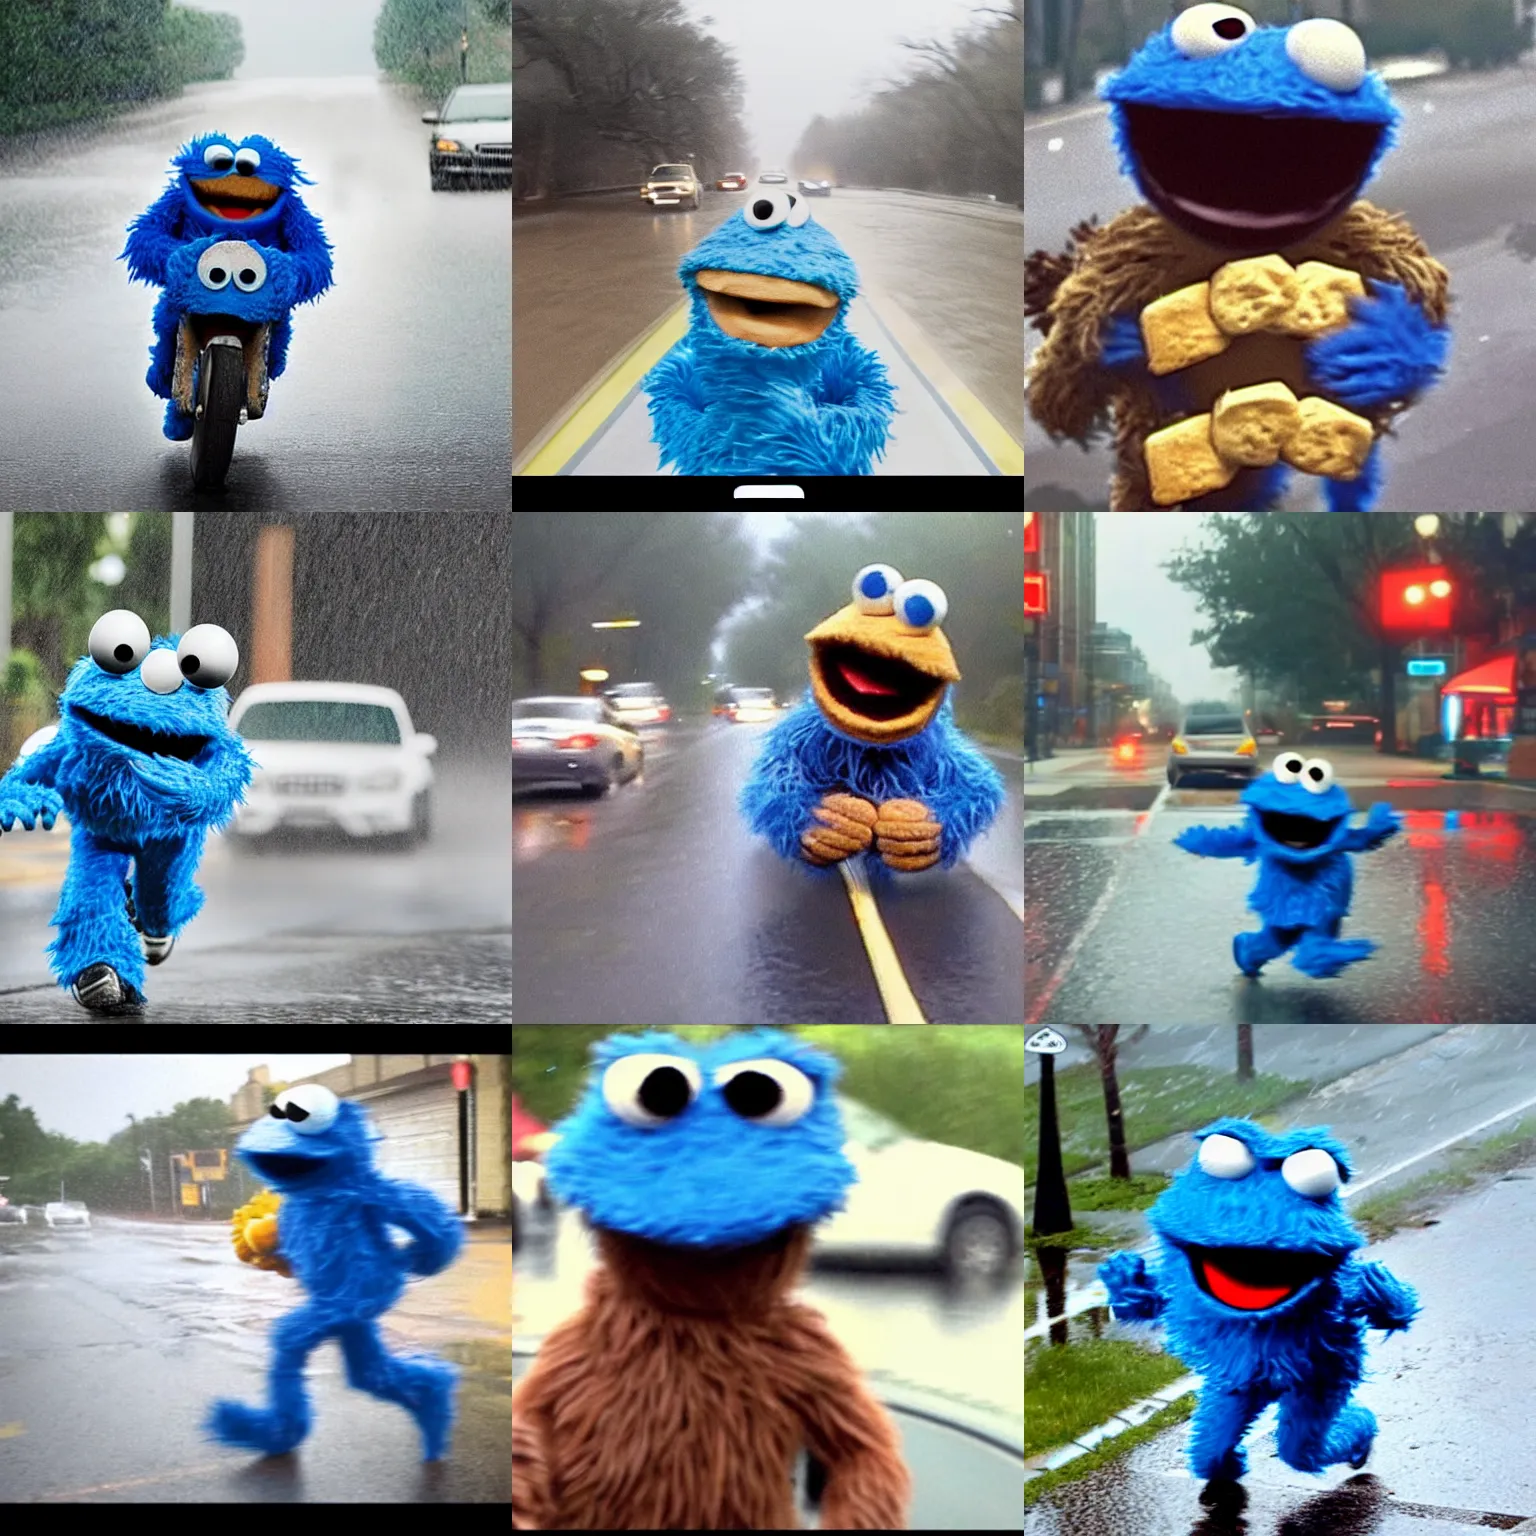 Prompt: Dash-cam footage of cookie monster running across a street in the rain holding stolen goods